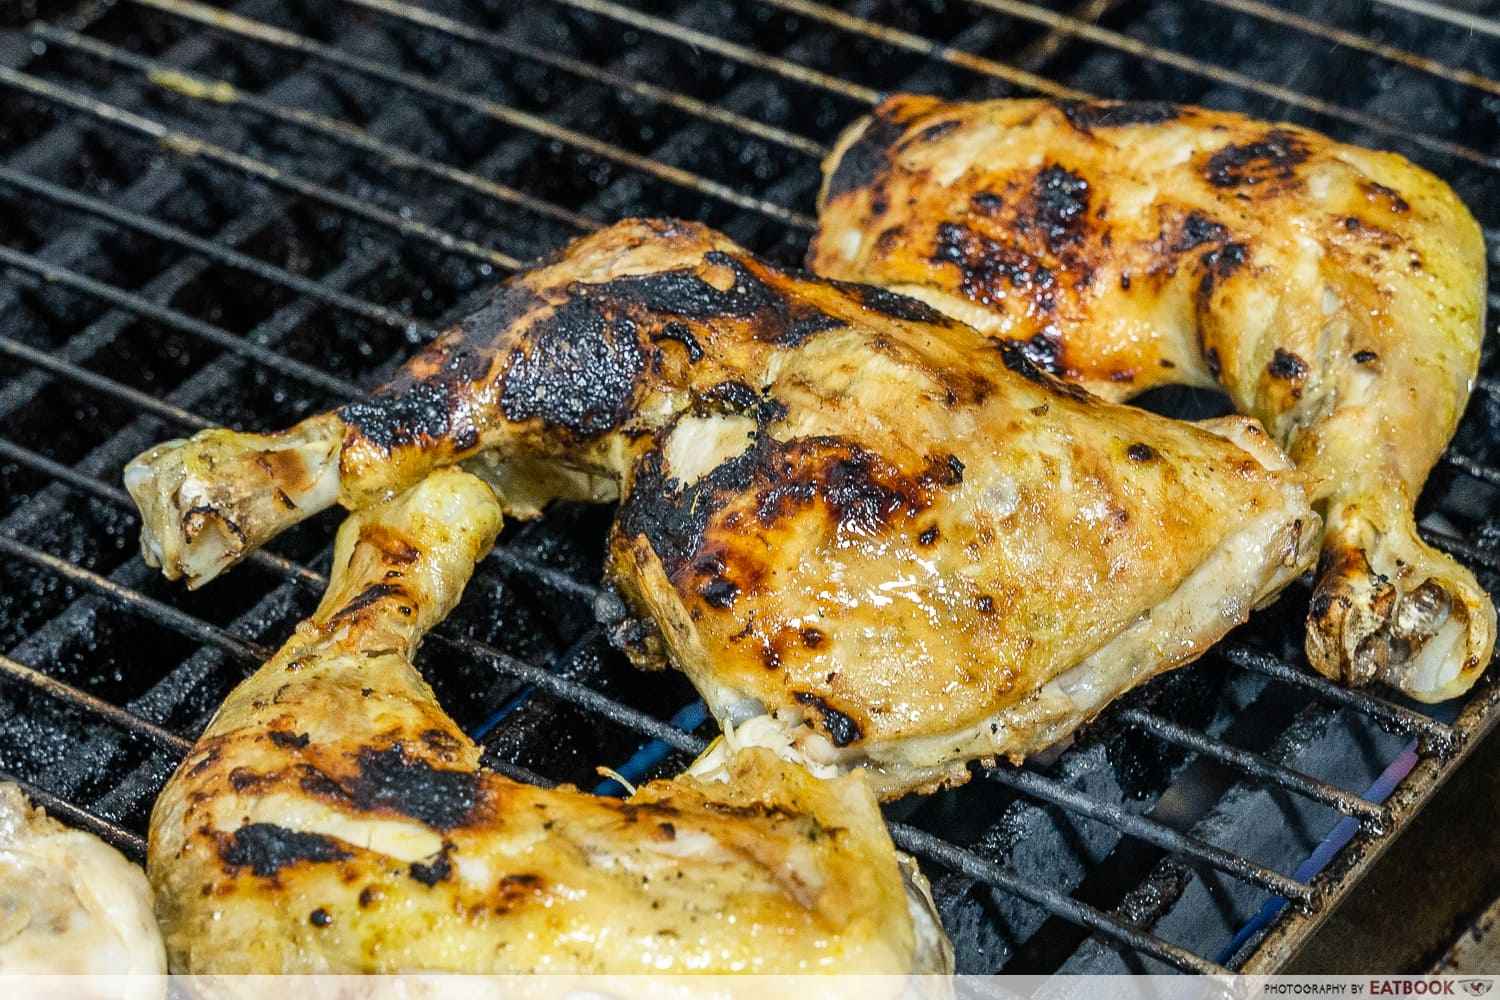 uncle penyet - grilling chicken